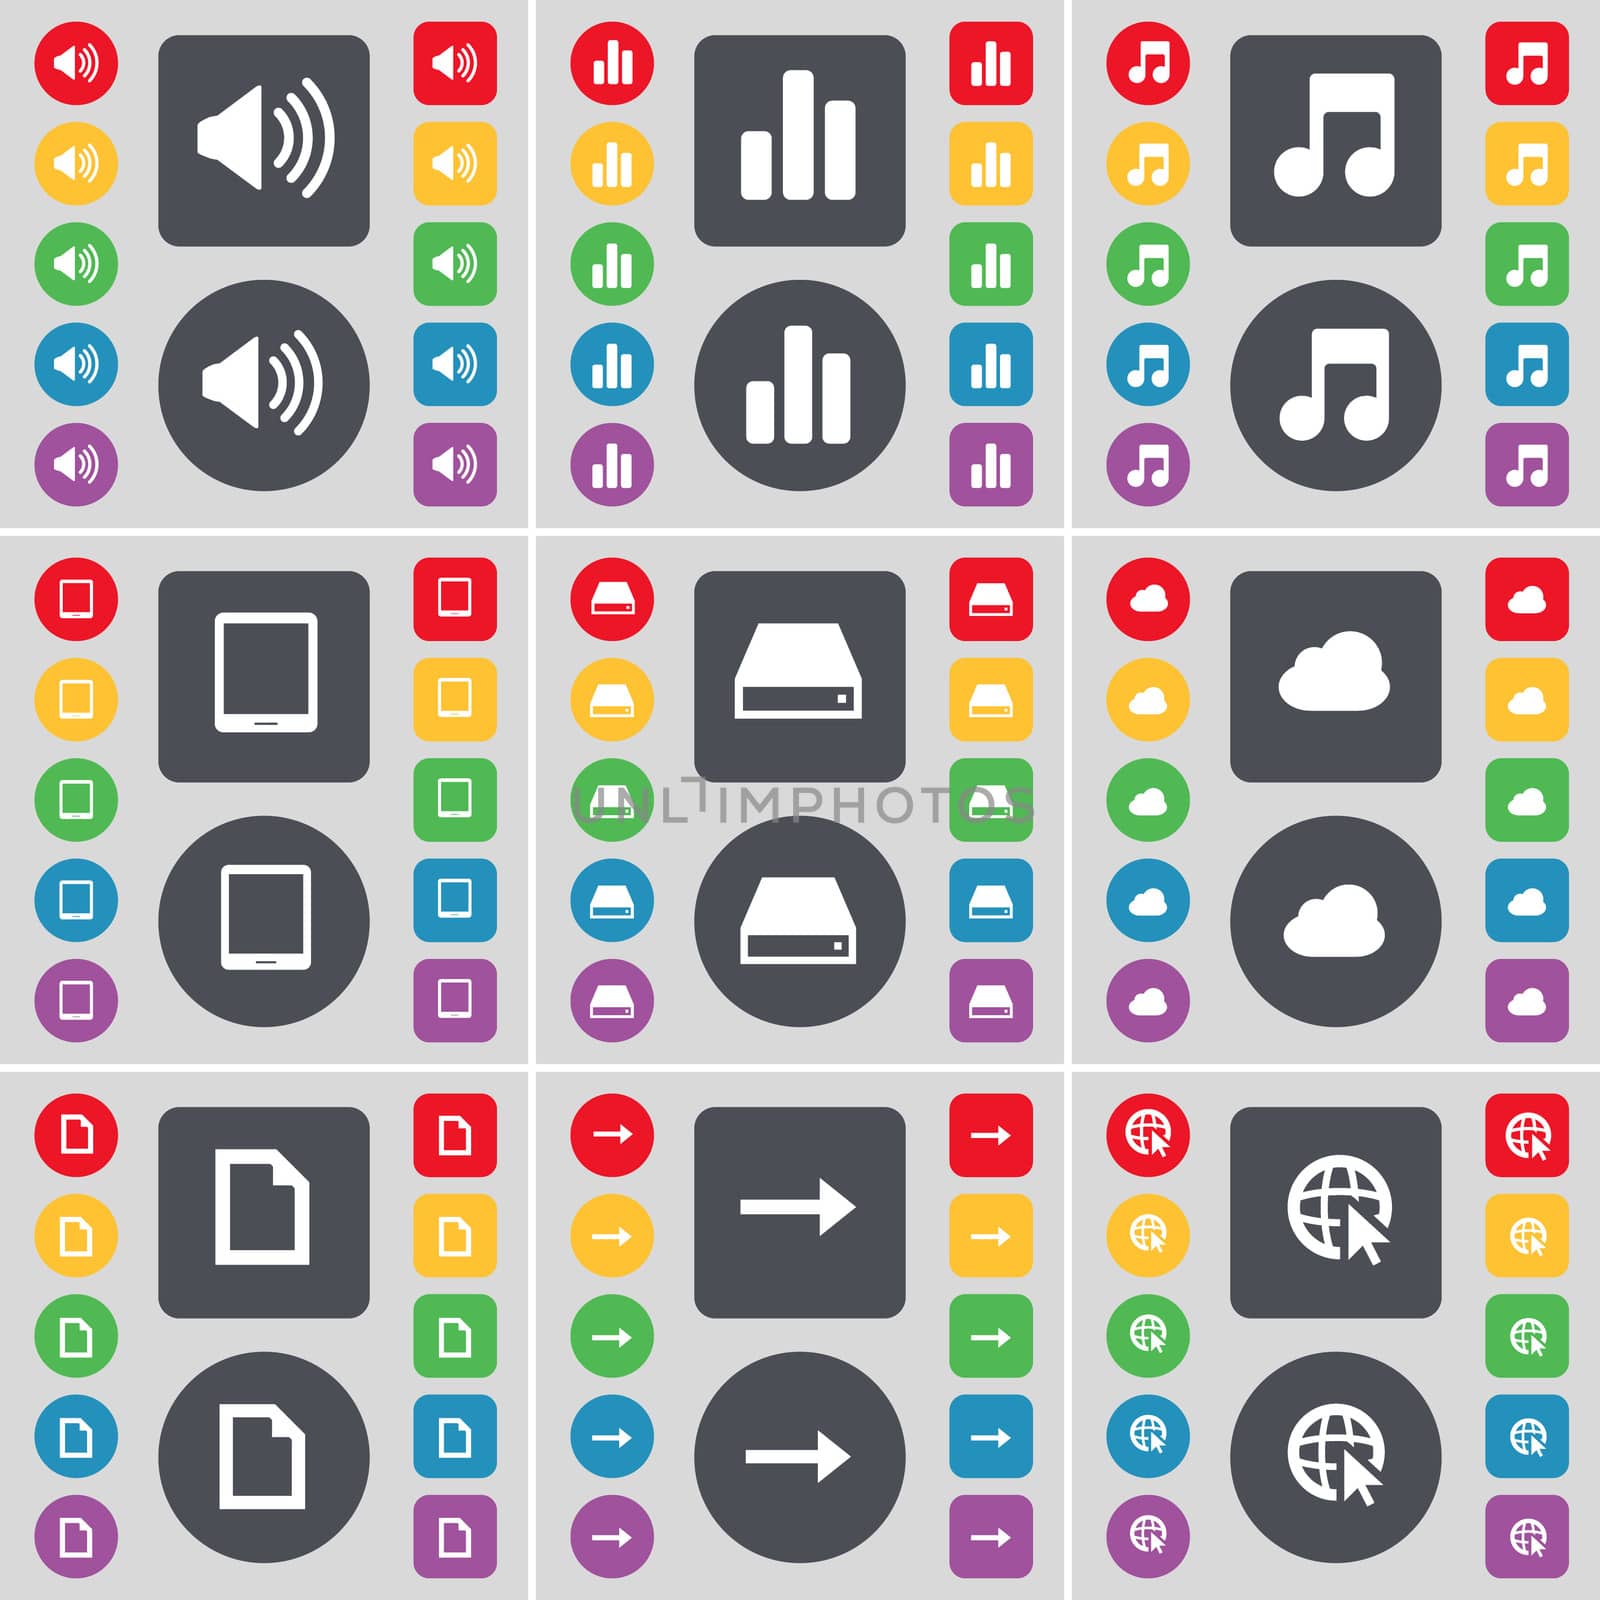 Sound, Diagram, Note, Tablet PC, Hard drive, Cloud, File, Arrow right, Web cursor icon symbol. A large set of flat, colored buttons for your design. illustration